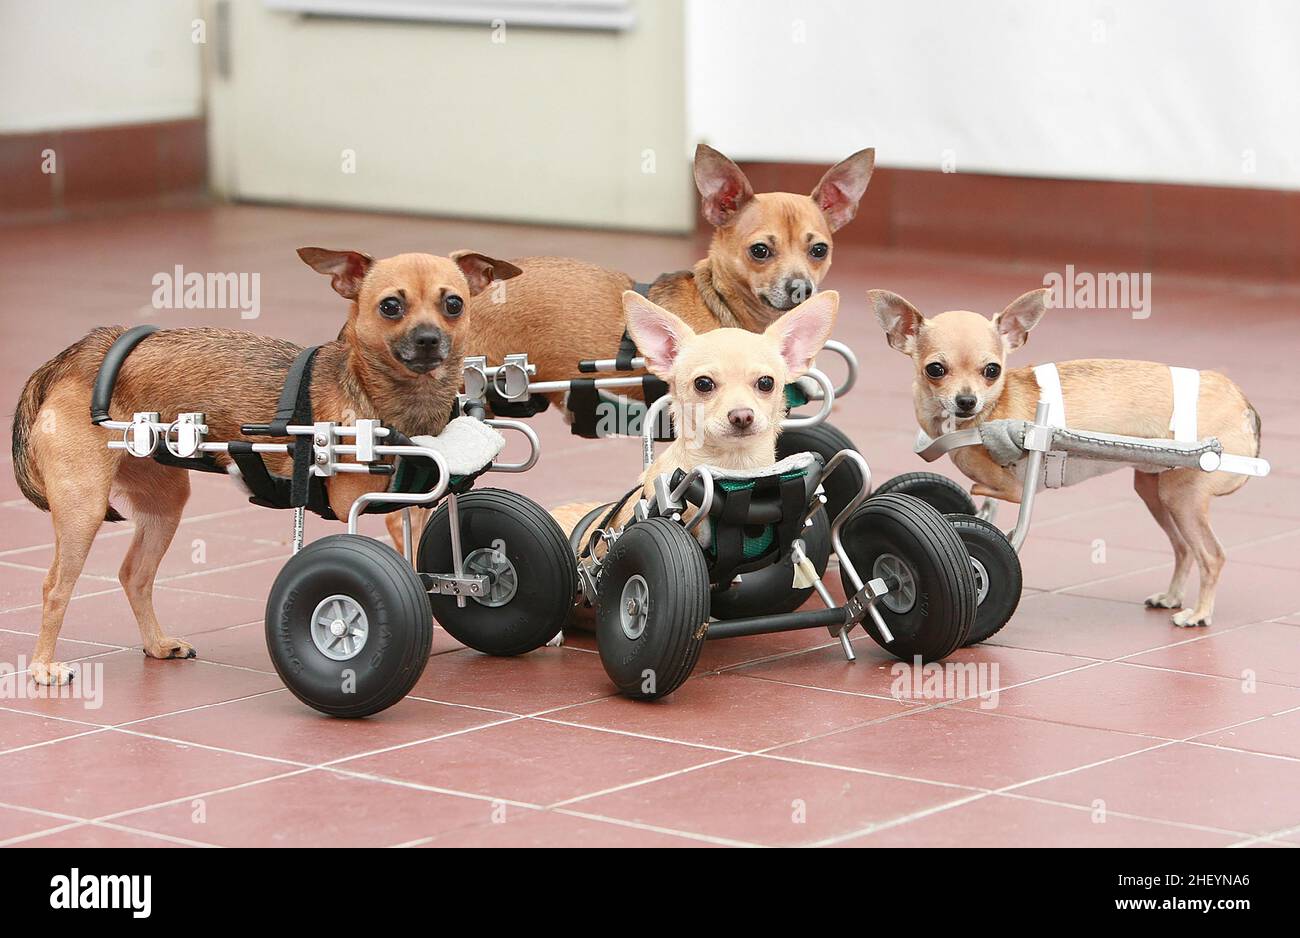 THE WORLDS FIRST FOUR CHIHUAHUA PUPS WHO WERE BORN WITHOUT FRONT LEGS, ON SPECIALLY DESIGNED WHEELS. .  THE WORLD'S FIRST FOUR CHIHUAHUA DOGS BORN WITHOUT FRONT LEGS HAVE LEARNT TO USE THEIR SPECIALLY ADAPTED WHEELS TO GET AROUND. NEW YORK, USA.  PICTURE: GARY ROBERTS Stock Photo